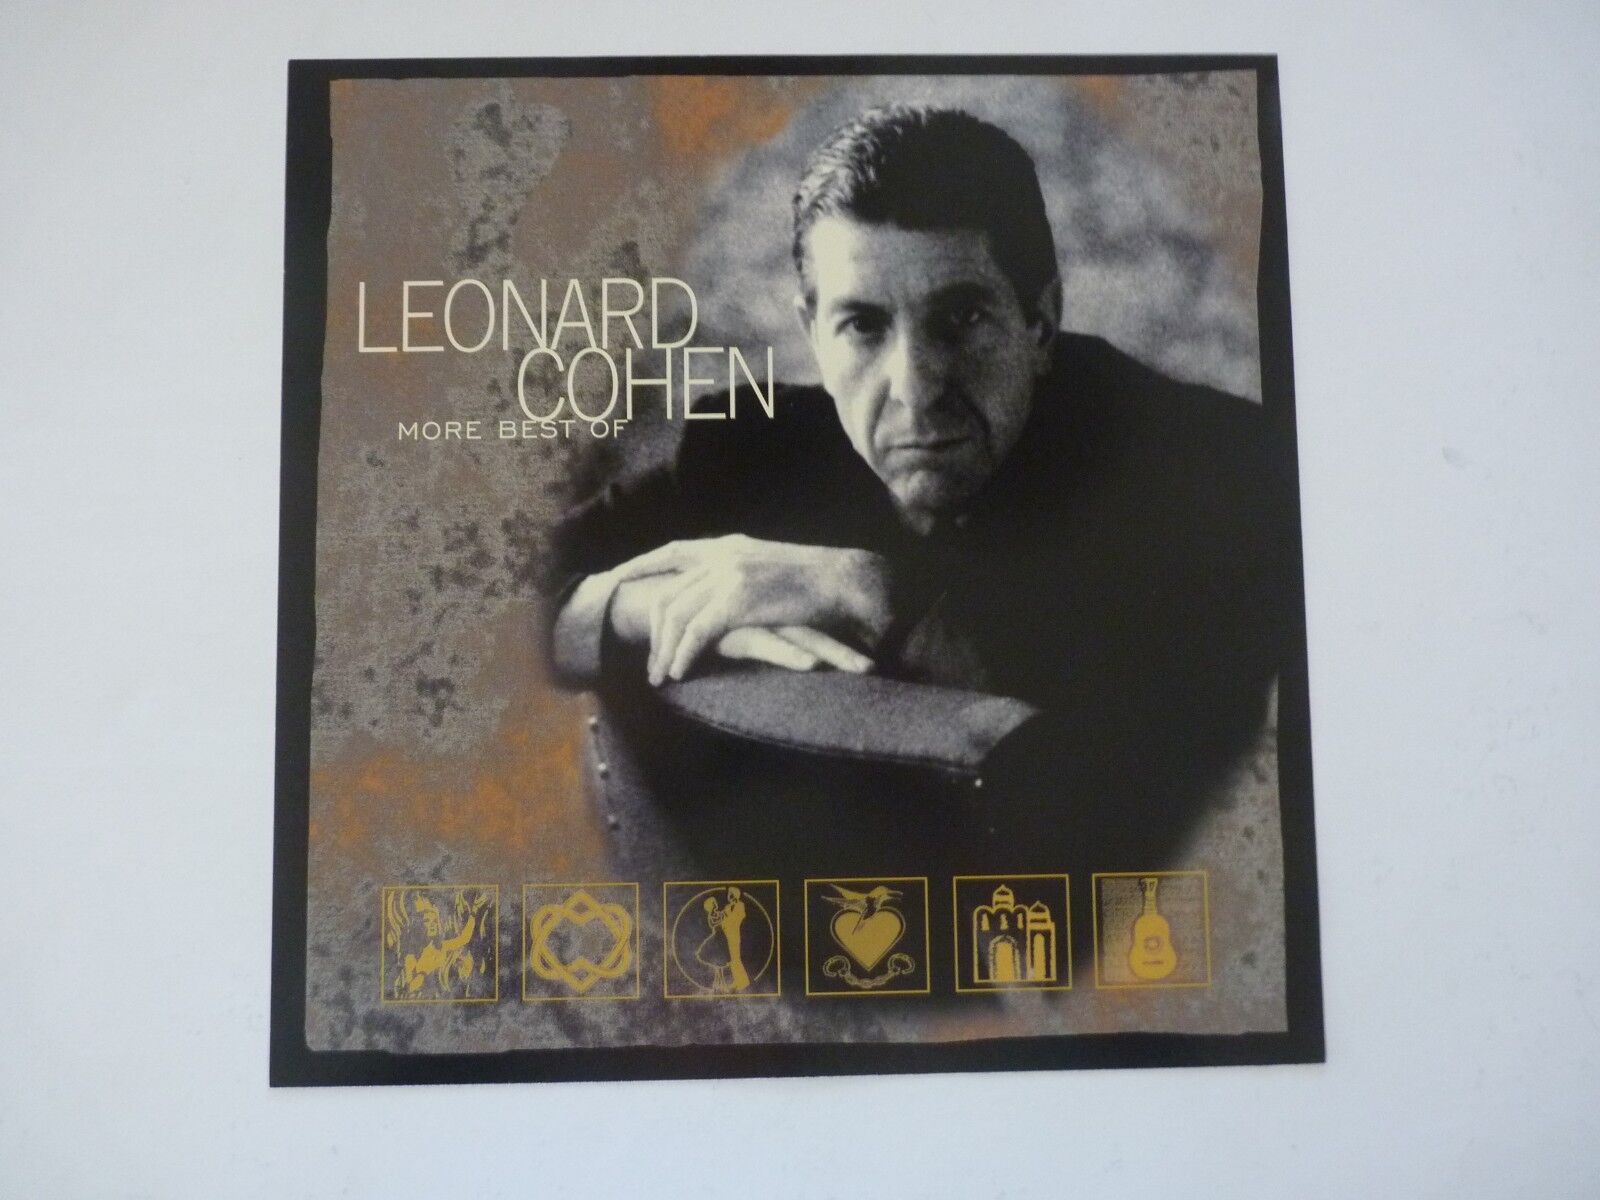 Leonard Cohen Best Of 1997 LP Record Photo Poster painting Flat 12x12 Poster